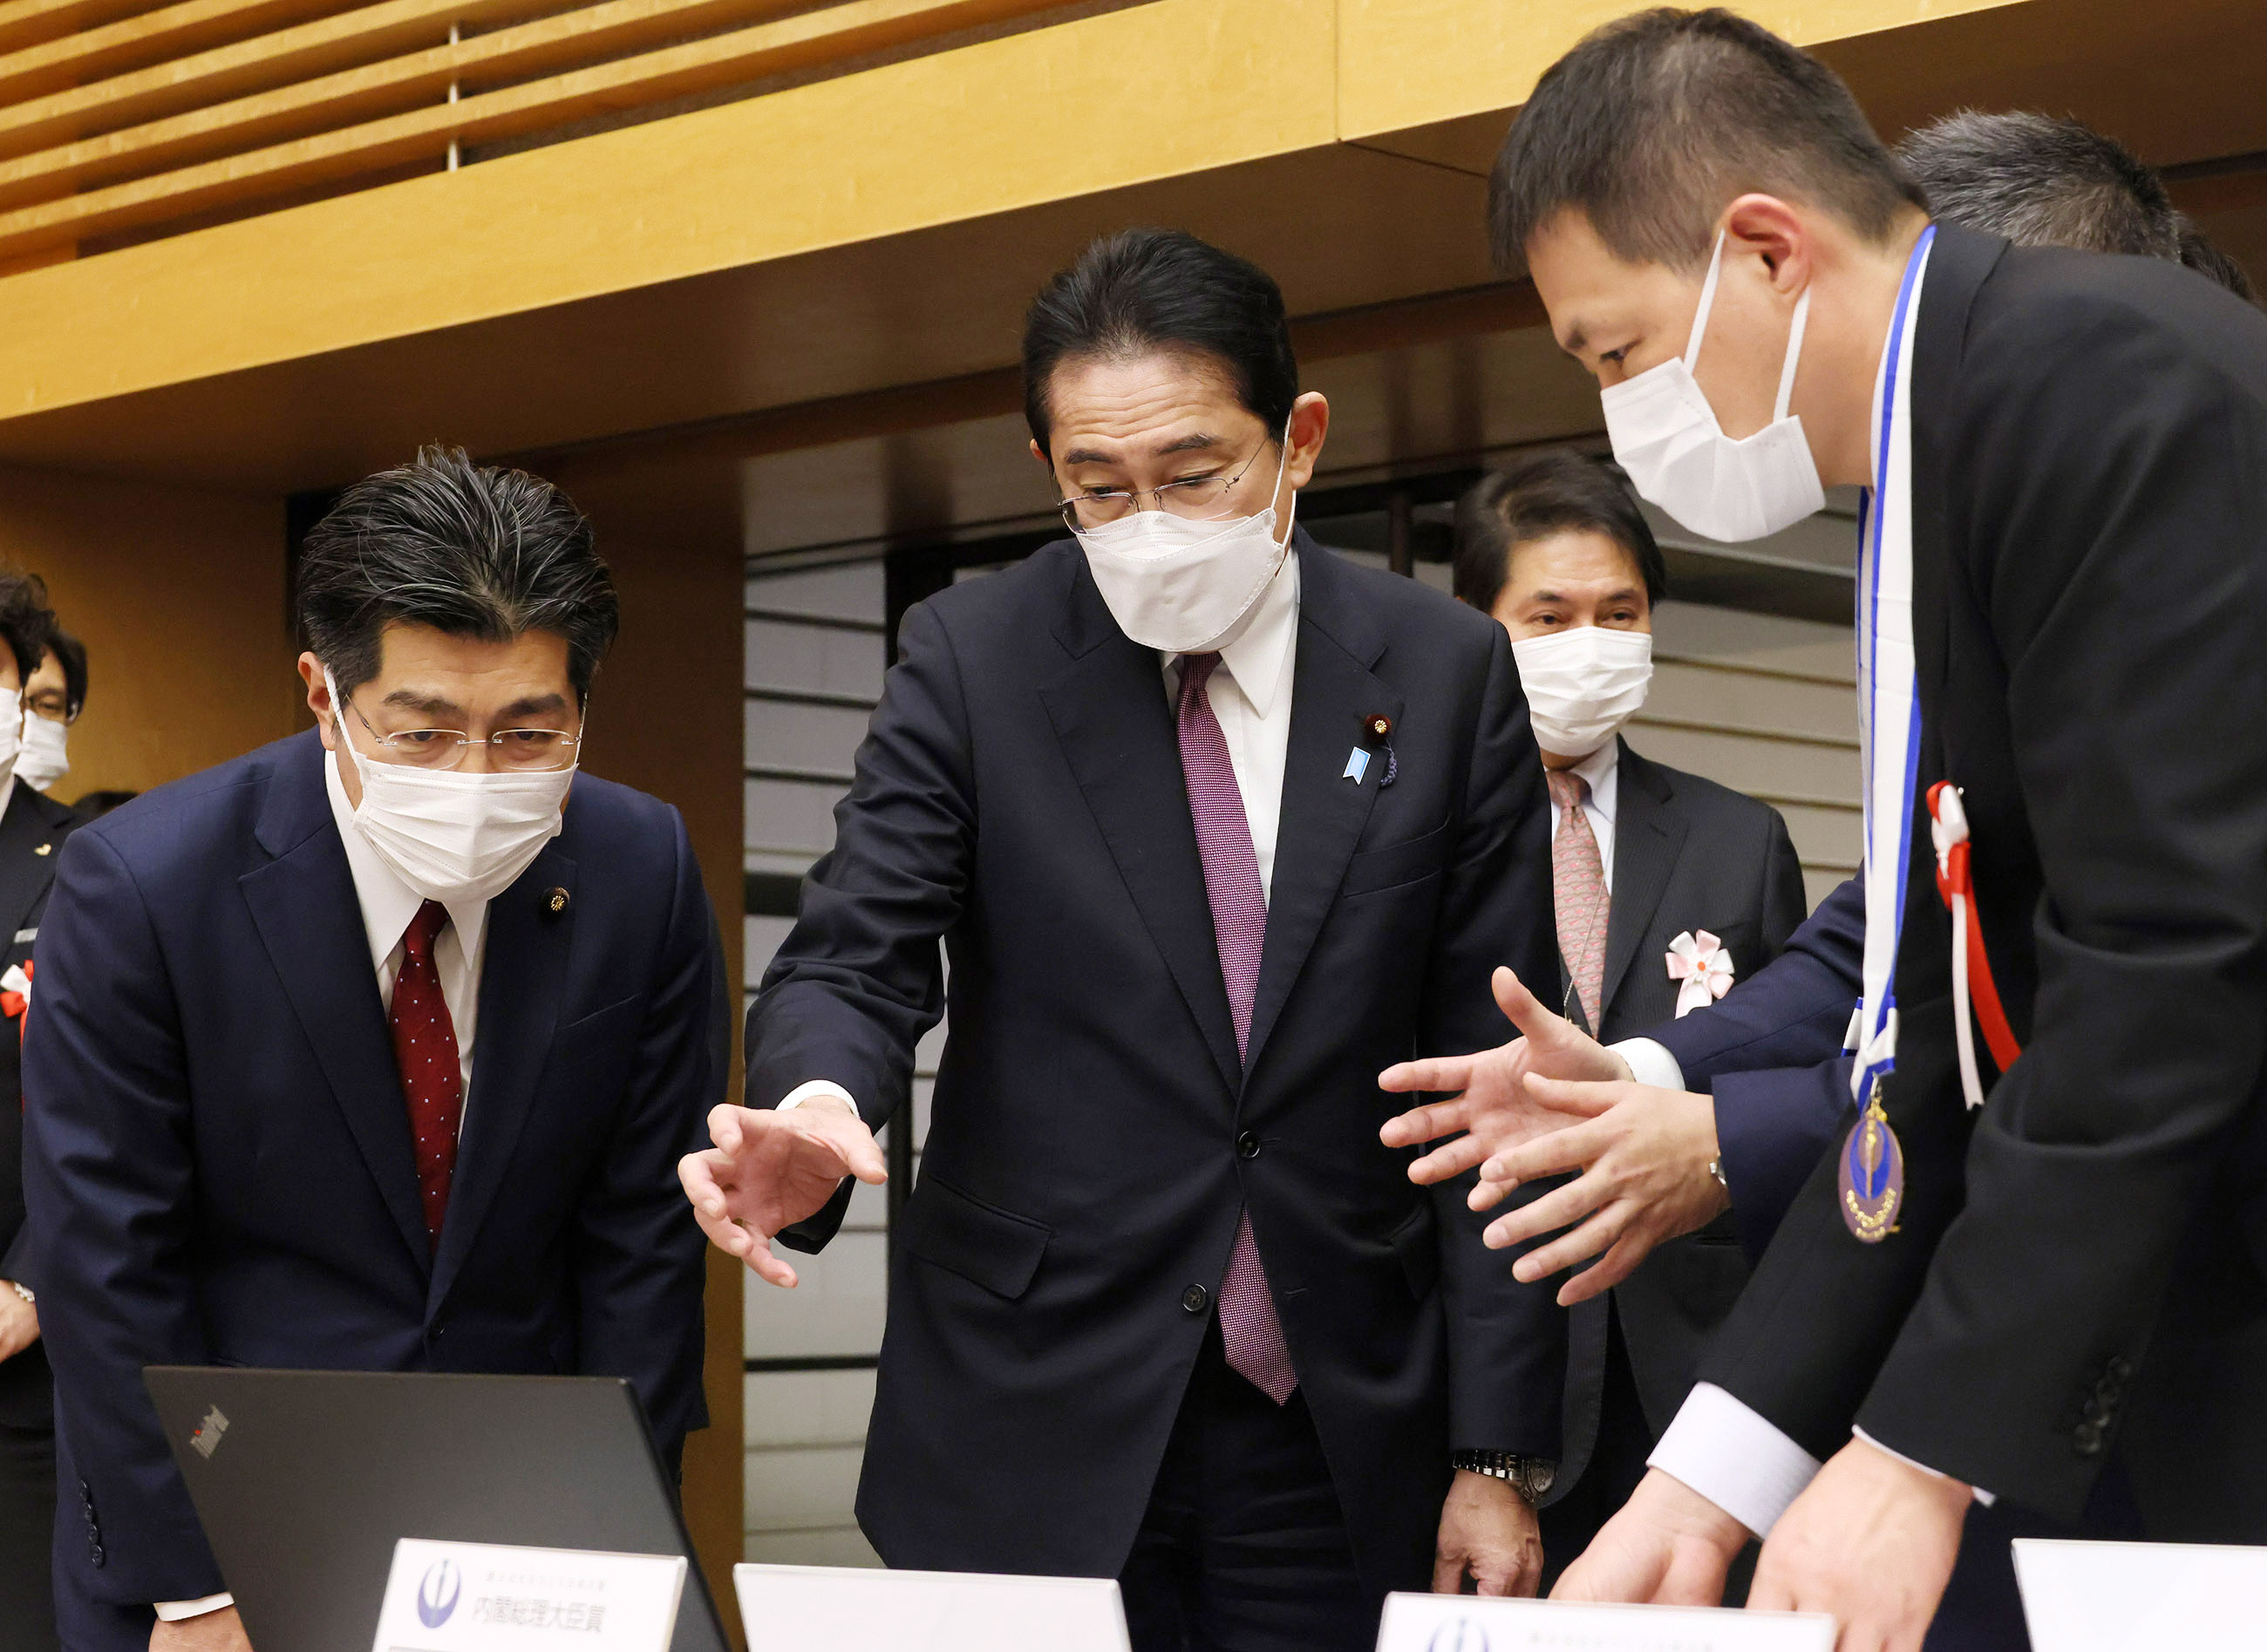 Prime Minister Kishida receiving an explanation on a product sample on display (3)